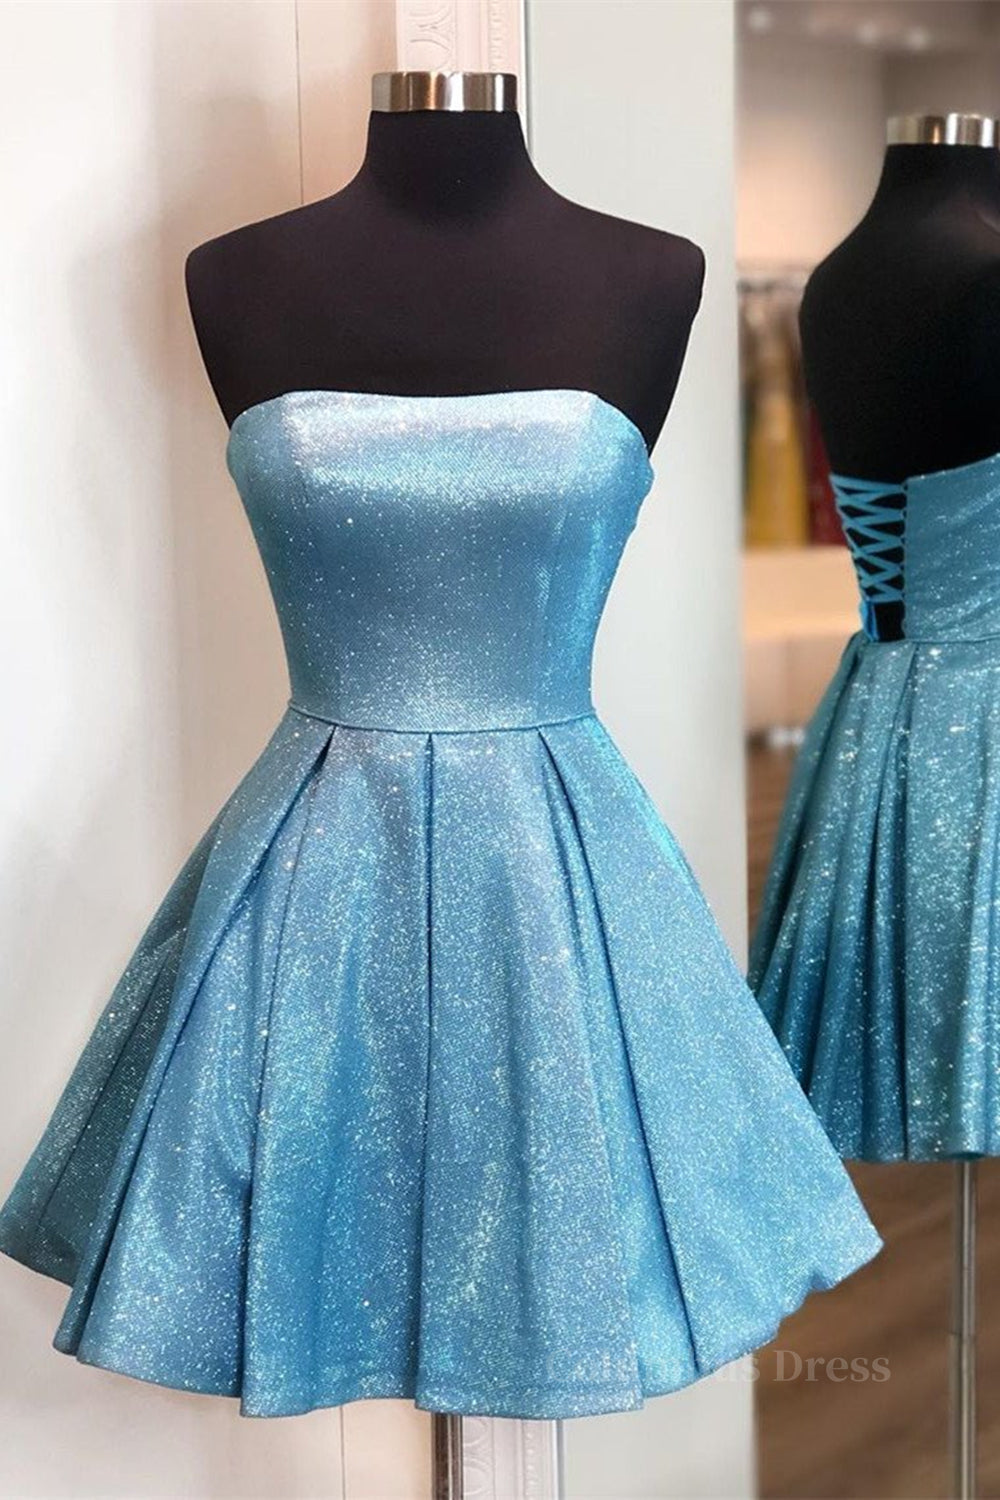 Shiny Strapless Blue Short Corset Prom Dresses, Open Back Blue Corset Homecoming Dresses, Blue Corset Formal Evening Dresses outfit, Classy Outfit Women